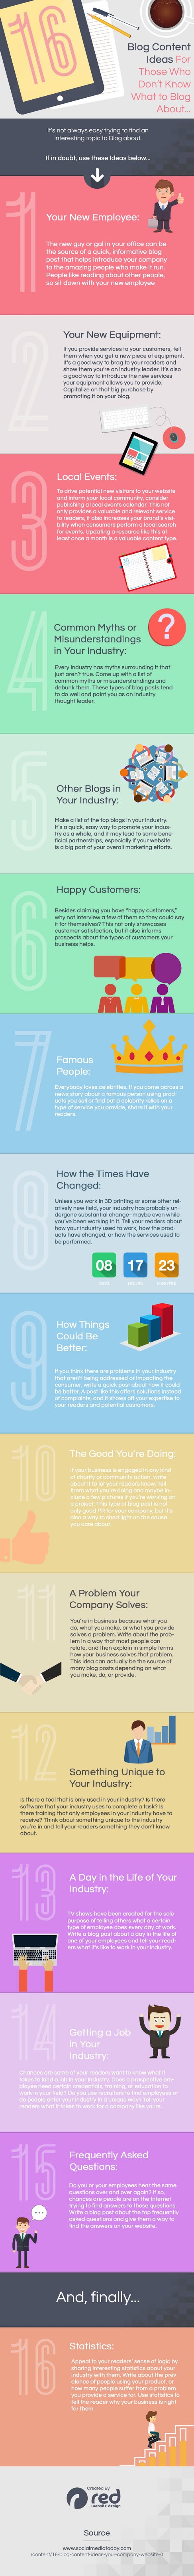 16 Website & Blog Content Ideas to Get More Traffic & Engagement #infographic